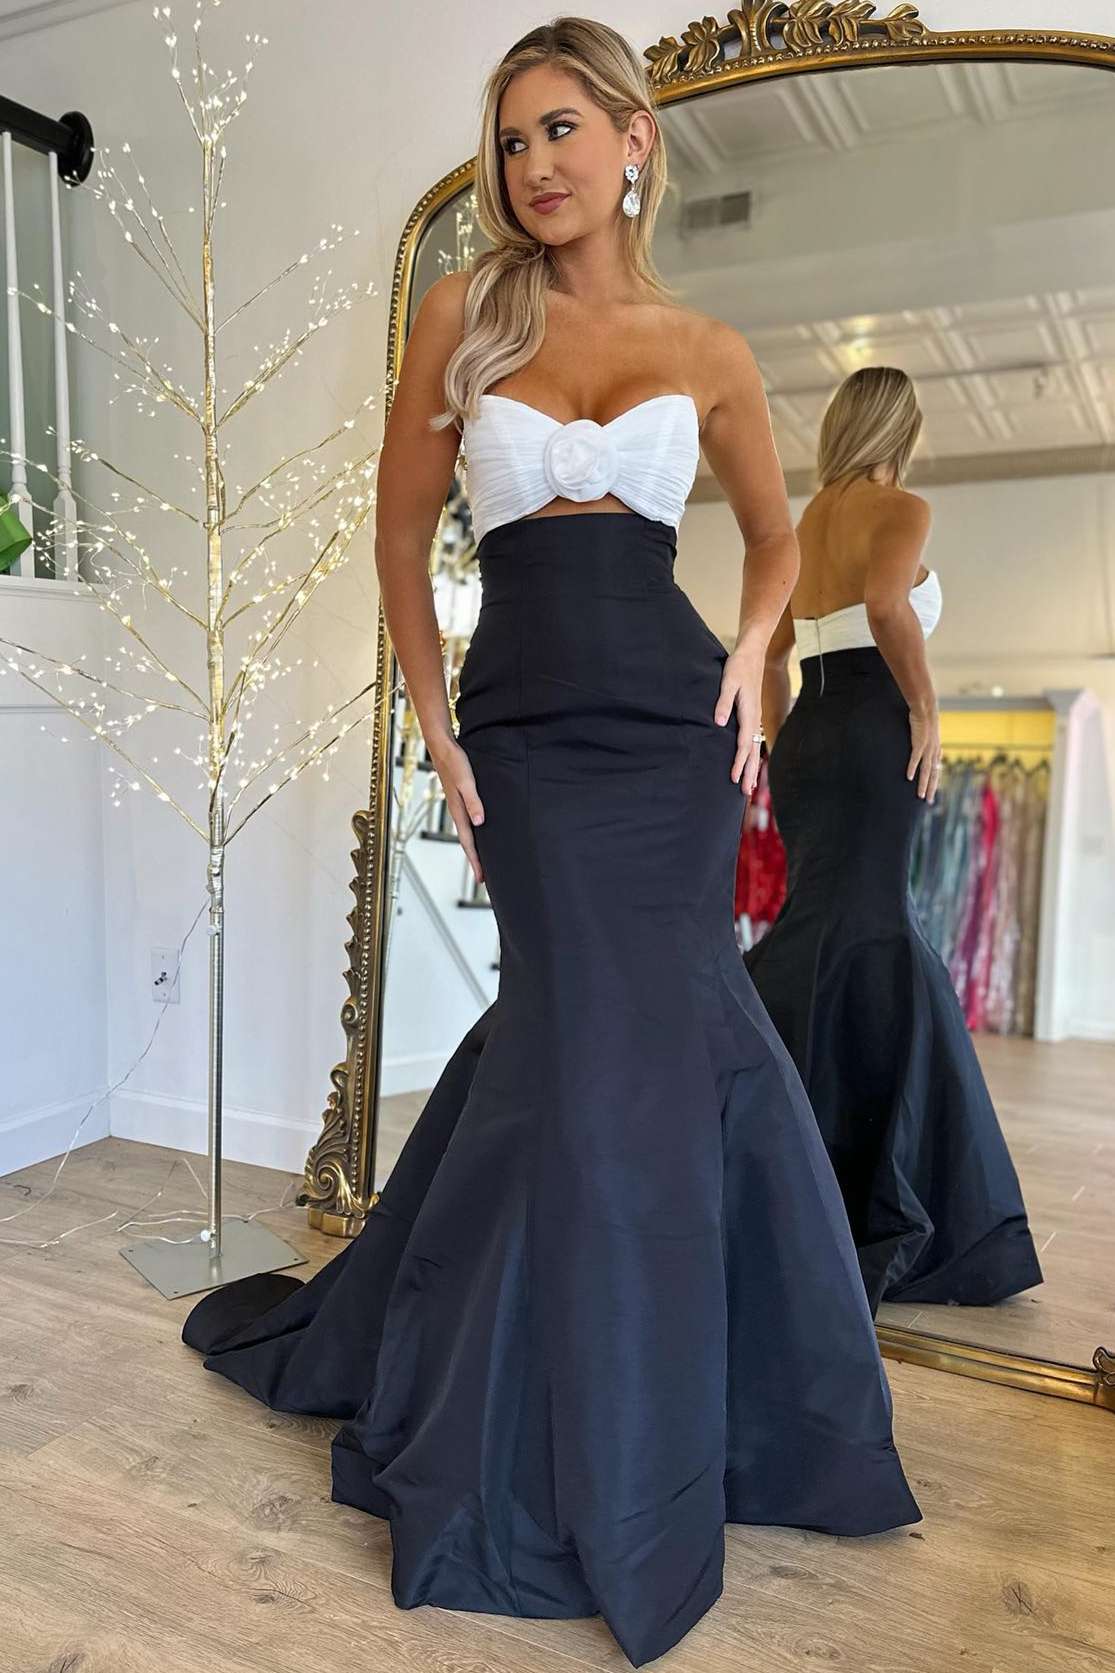 Julie | Strapless White and Black Ruched Mermaid Prom Dress